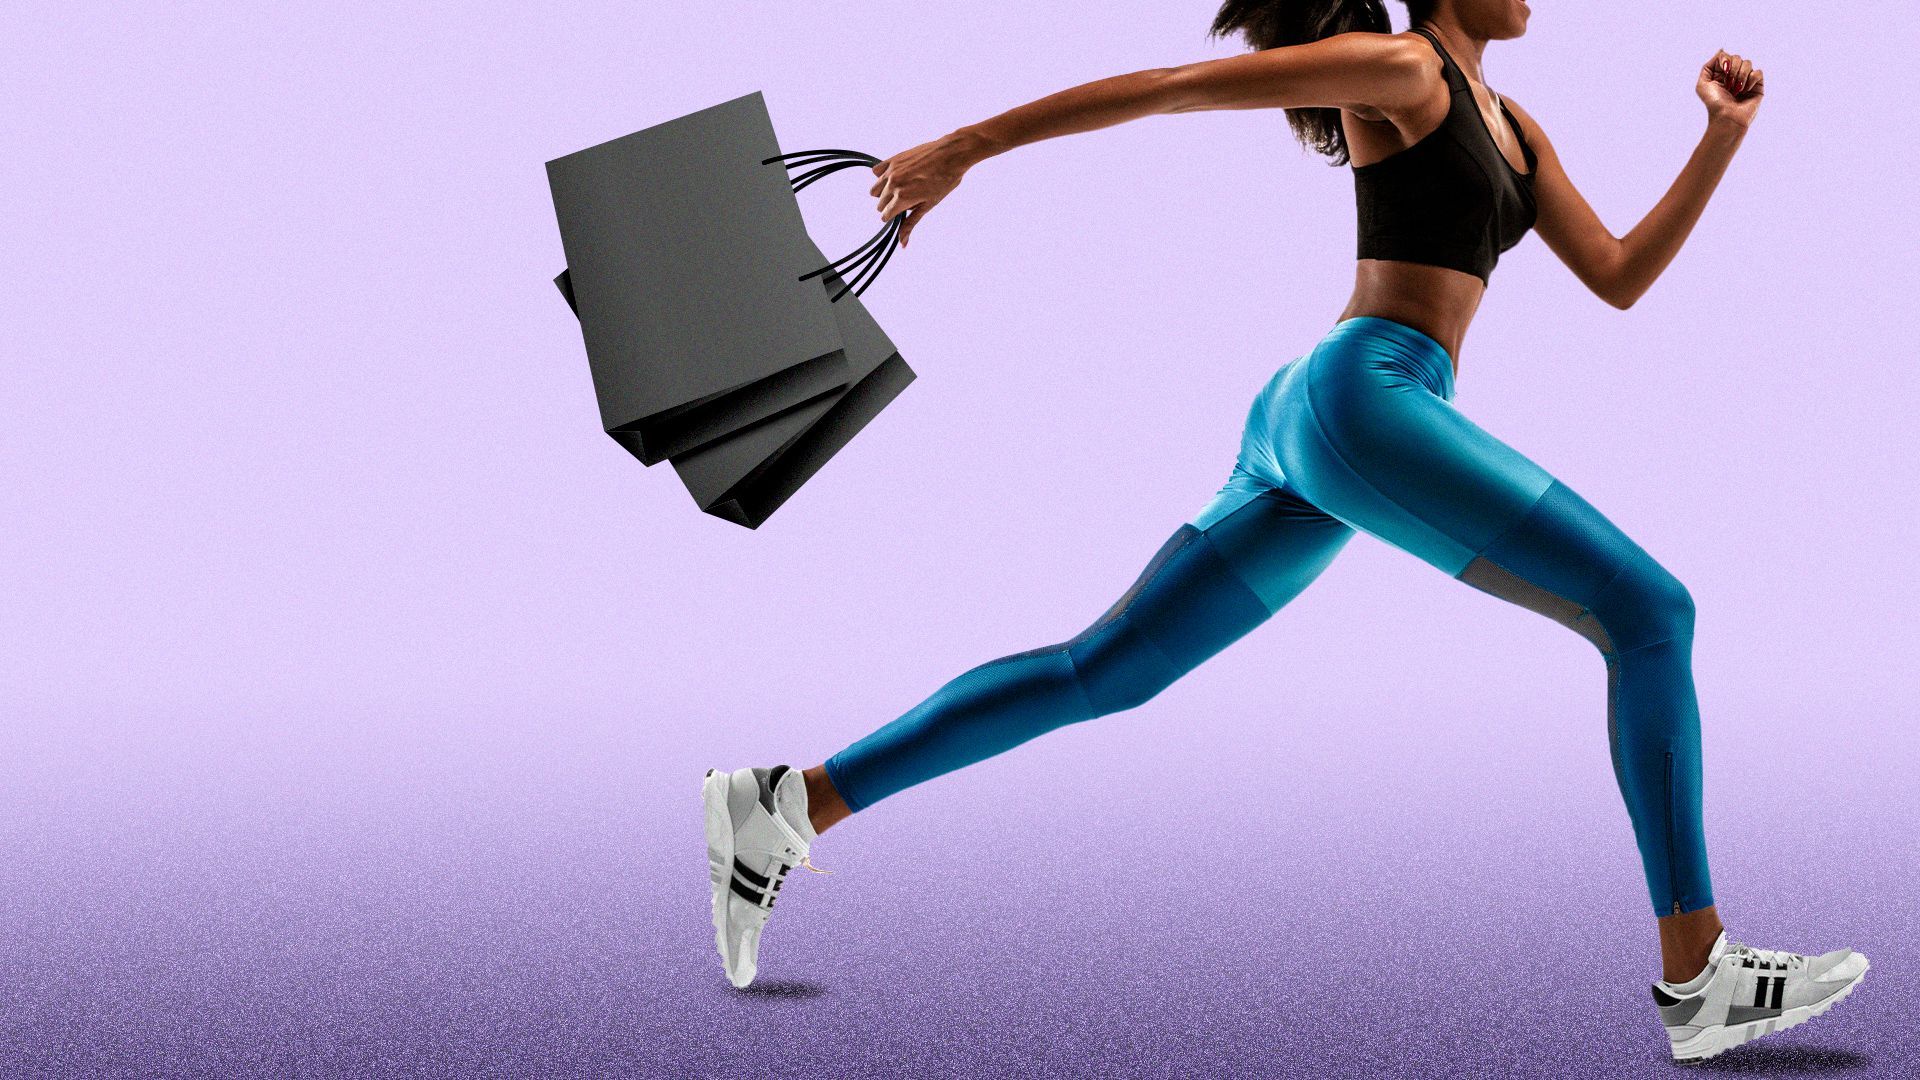 Activewear brand Vuori to open more than 100 U.S. stores in next five years